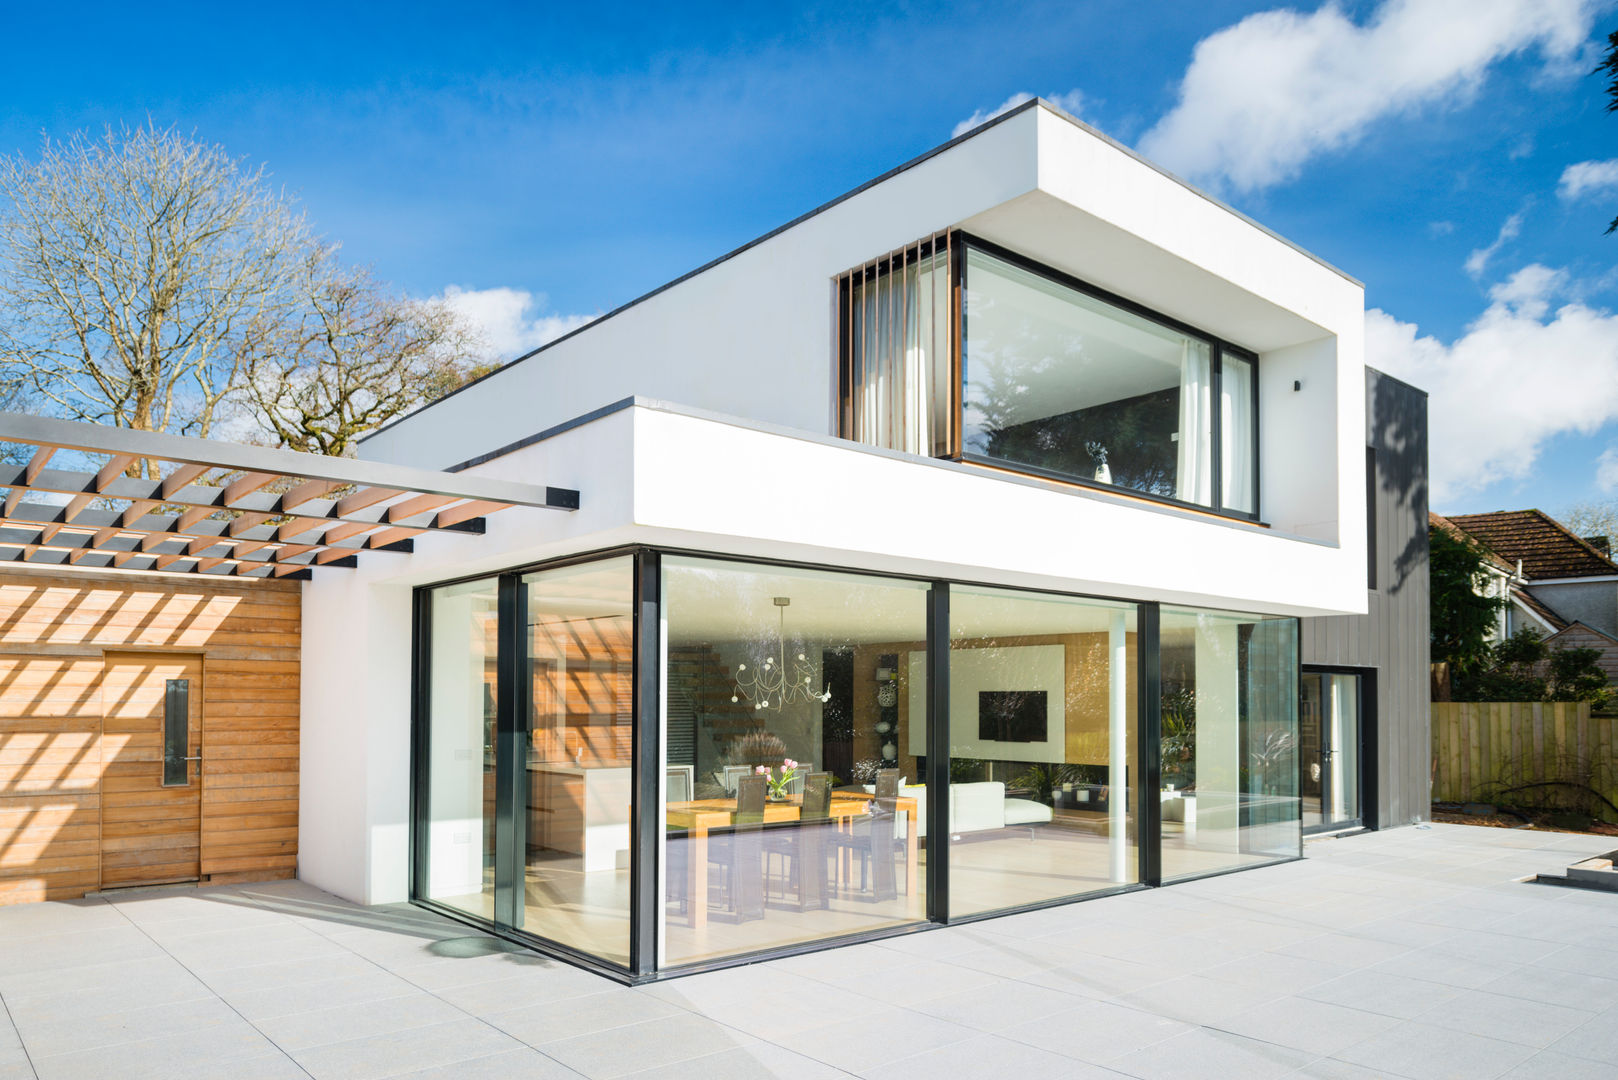 White Oaks Exterior Barc Architects Будинки contemporary,modern,bold,glass,render,flat roof